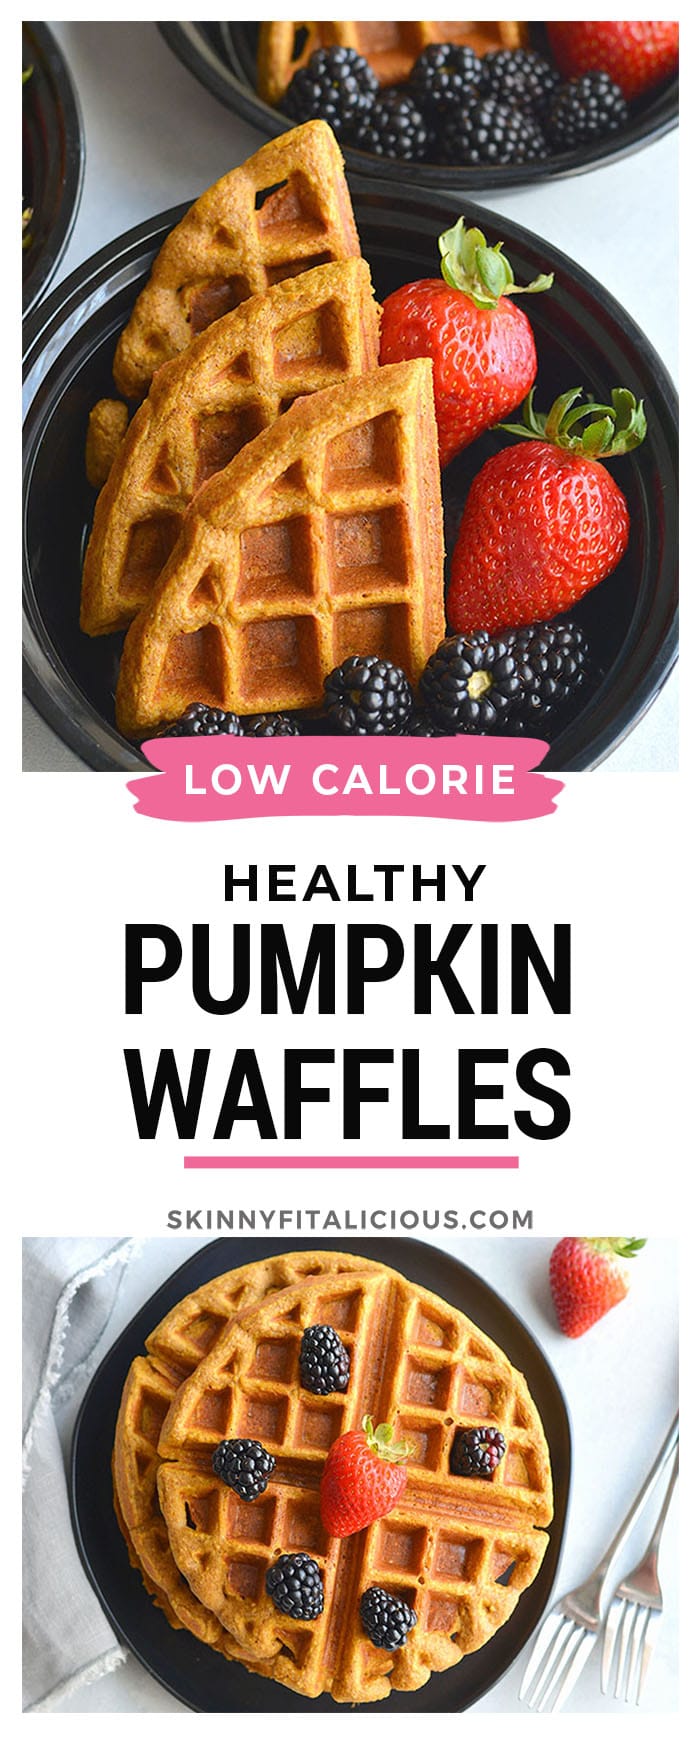 Whole Grain Pumpkin Spice Waffles! Freezer friendly, made with simple real food ingredients, perfect for breakfast meal prep or weekend brunch. Made dairy and gluten free with minimal added sugar. 